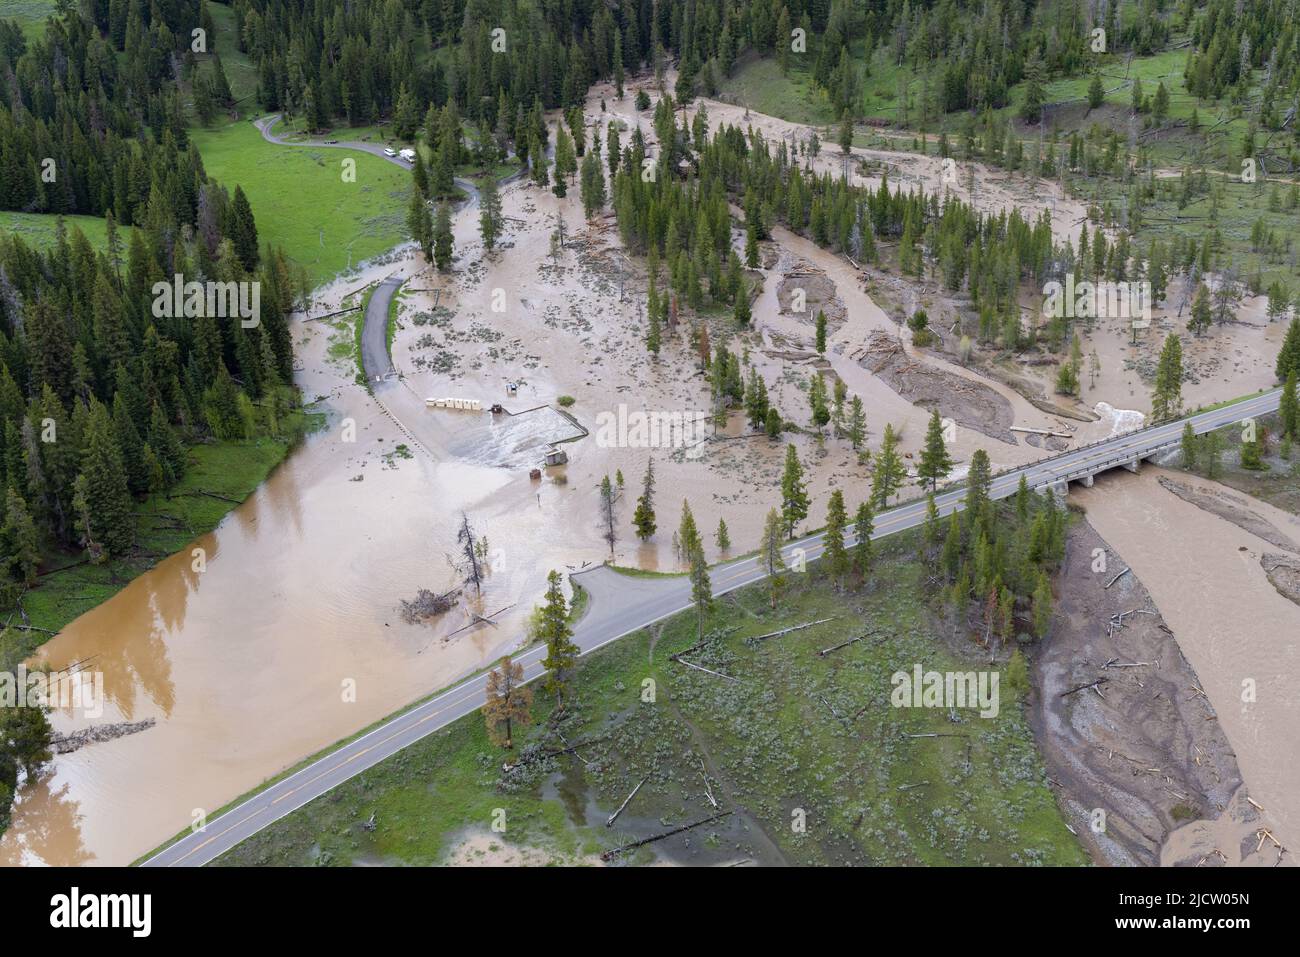 Yellowstone, United States. 13th June, 2022. The Pebble Creek campground is washed out after record rains and snow melt caused destructive floods closing Yellowstone National Park at the start of the busy season, June 13, 2022 in Yellowstone, Montana. Credit: Jacob W. Frank/NPS Photo/Alamy Live News Stock Photo